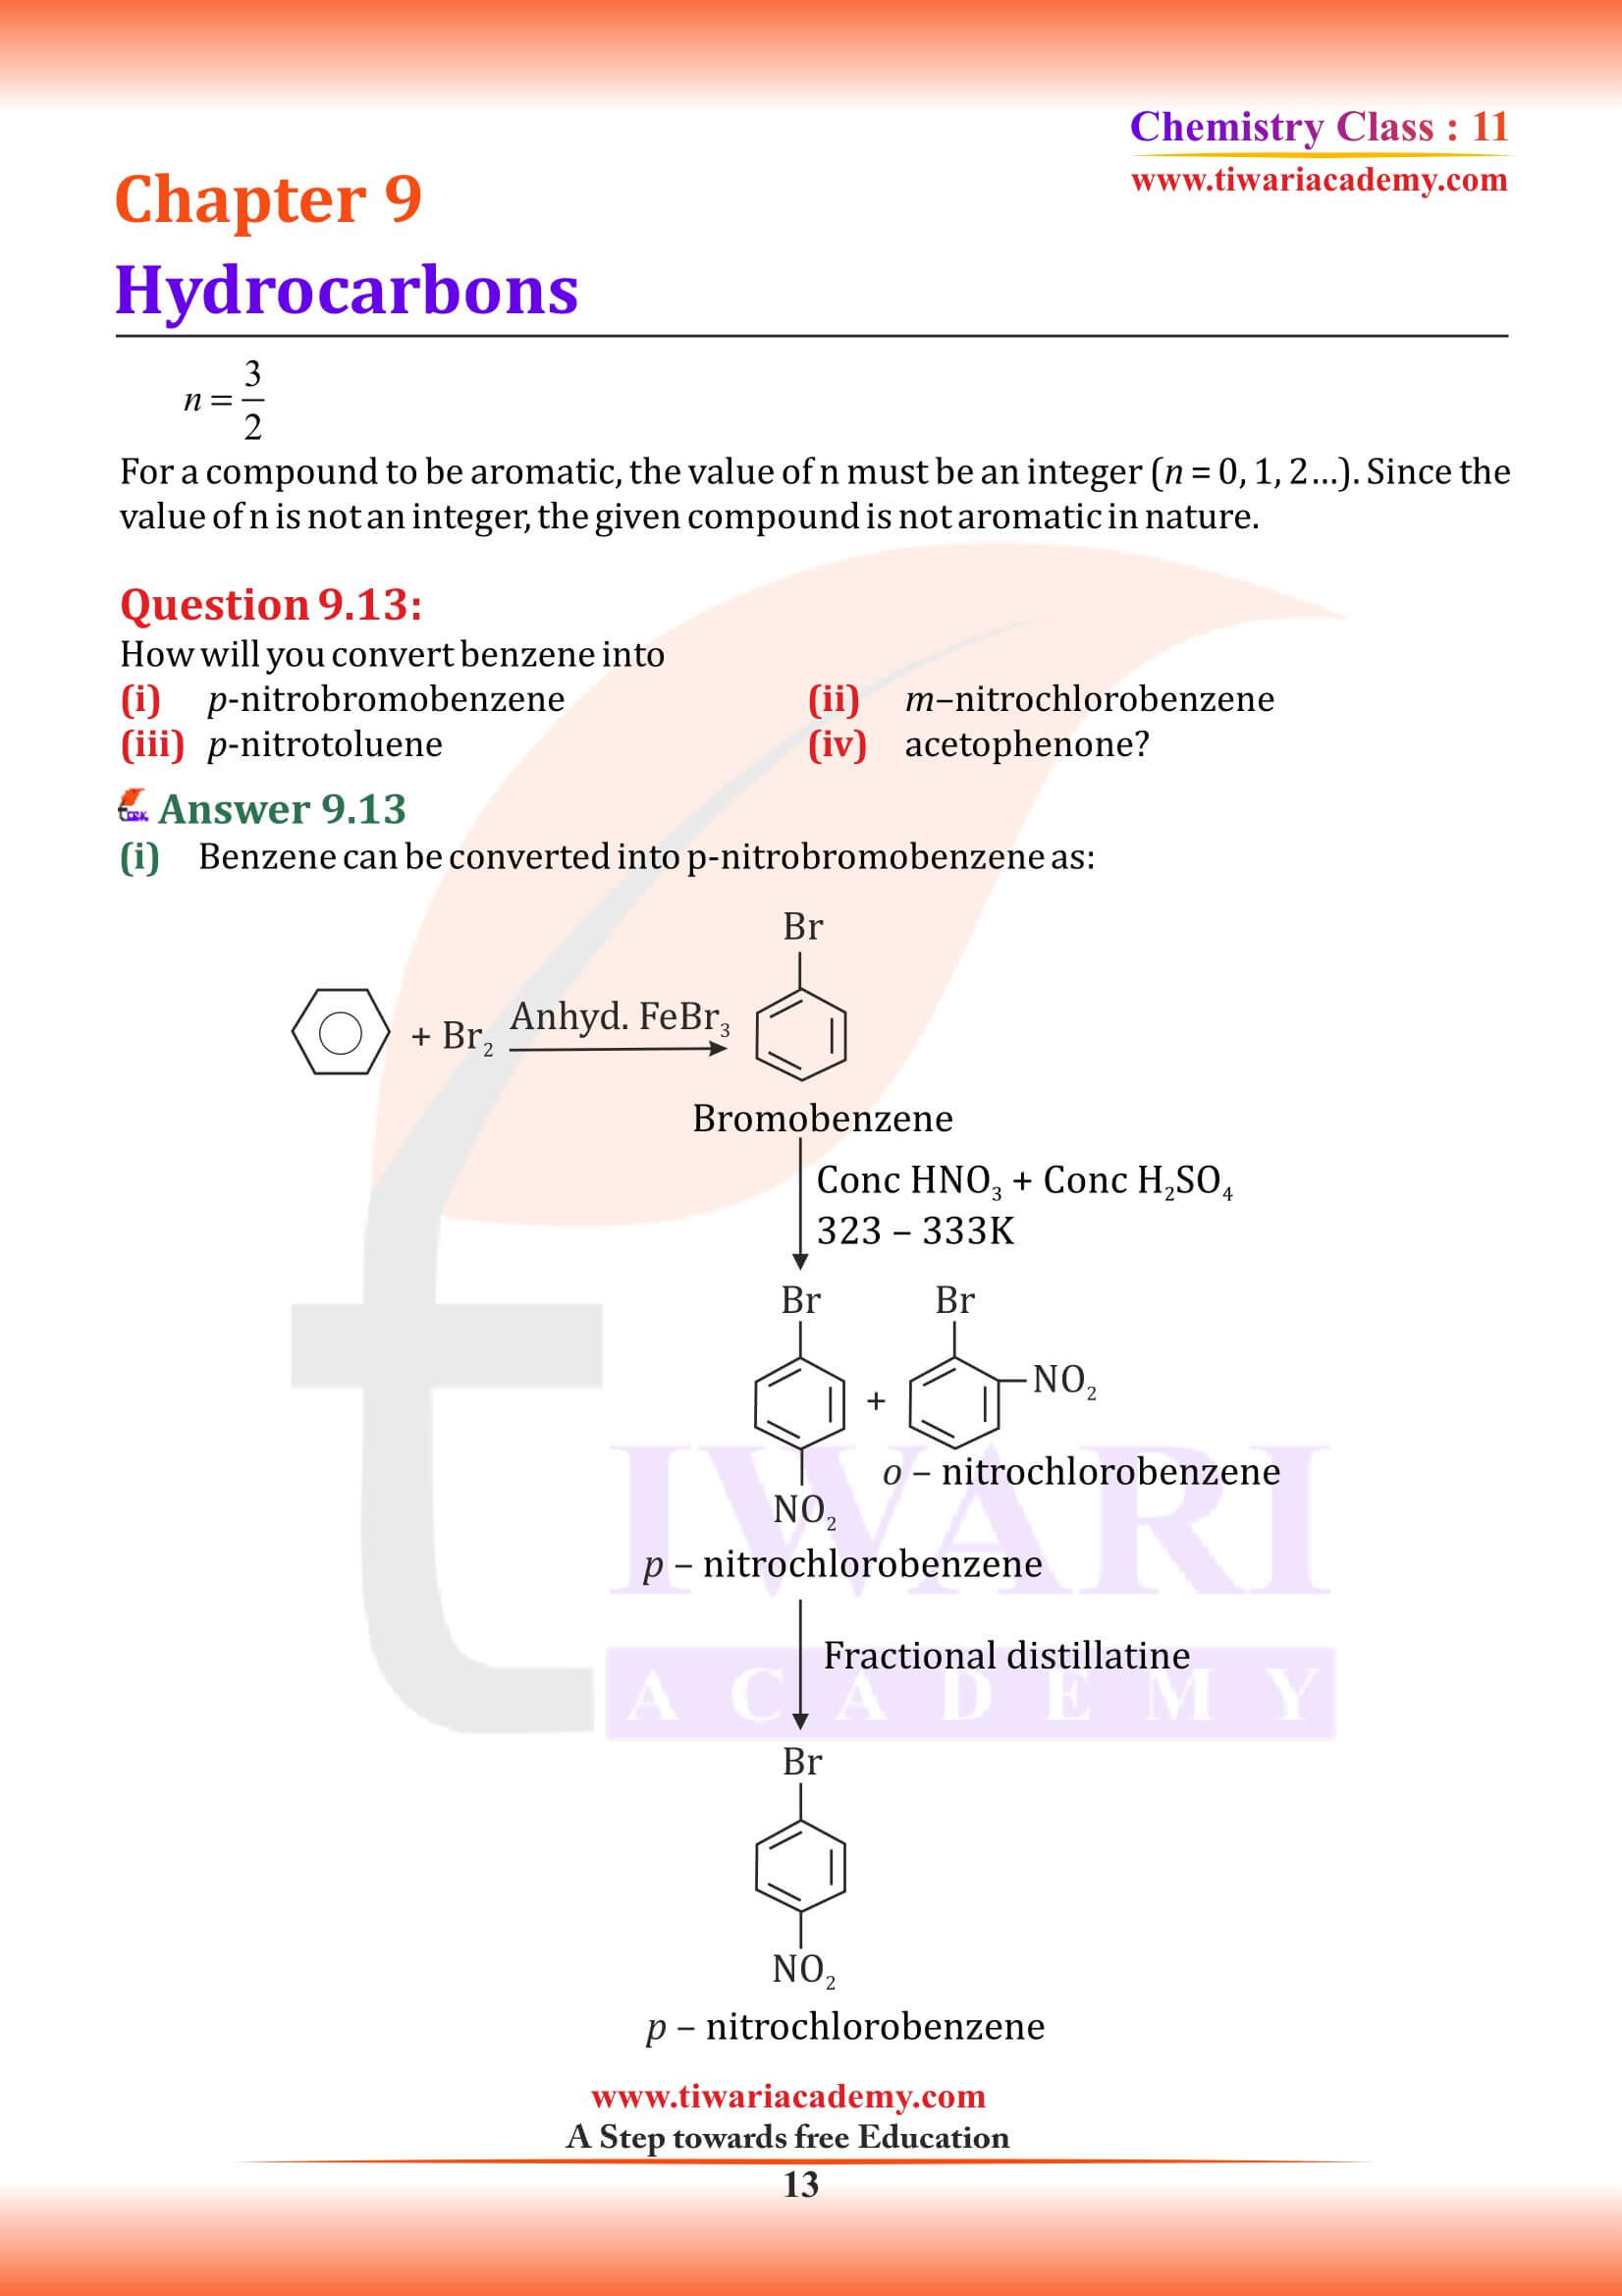 NCERT Class 11 Chemistry Chapter 9 Guide